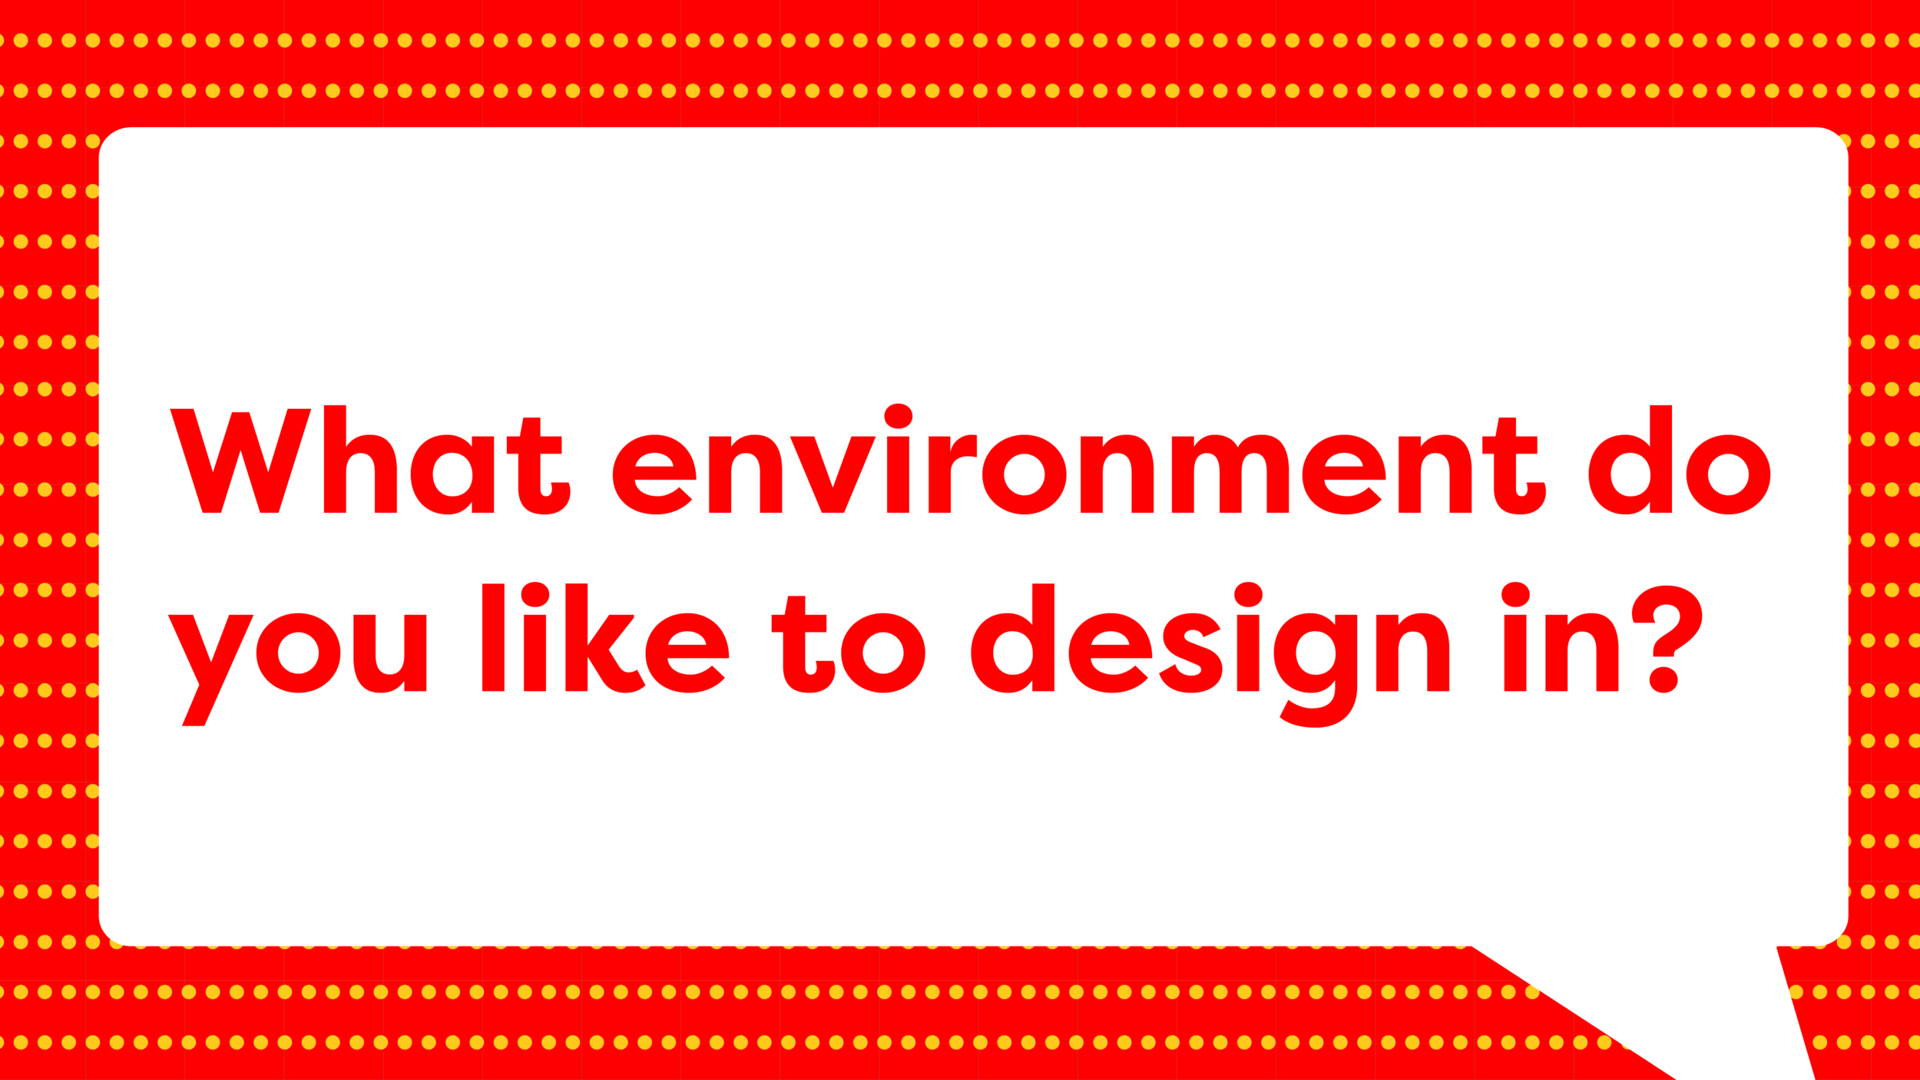 Featured image for What environment do you like to design in?